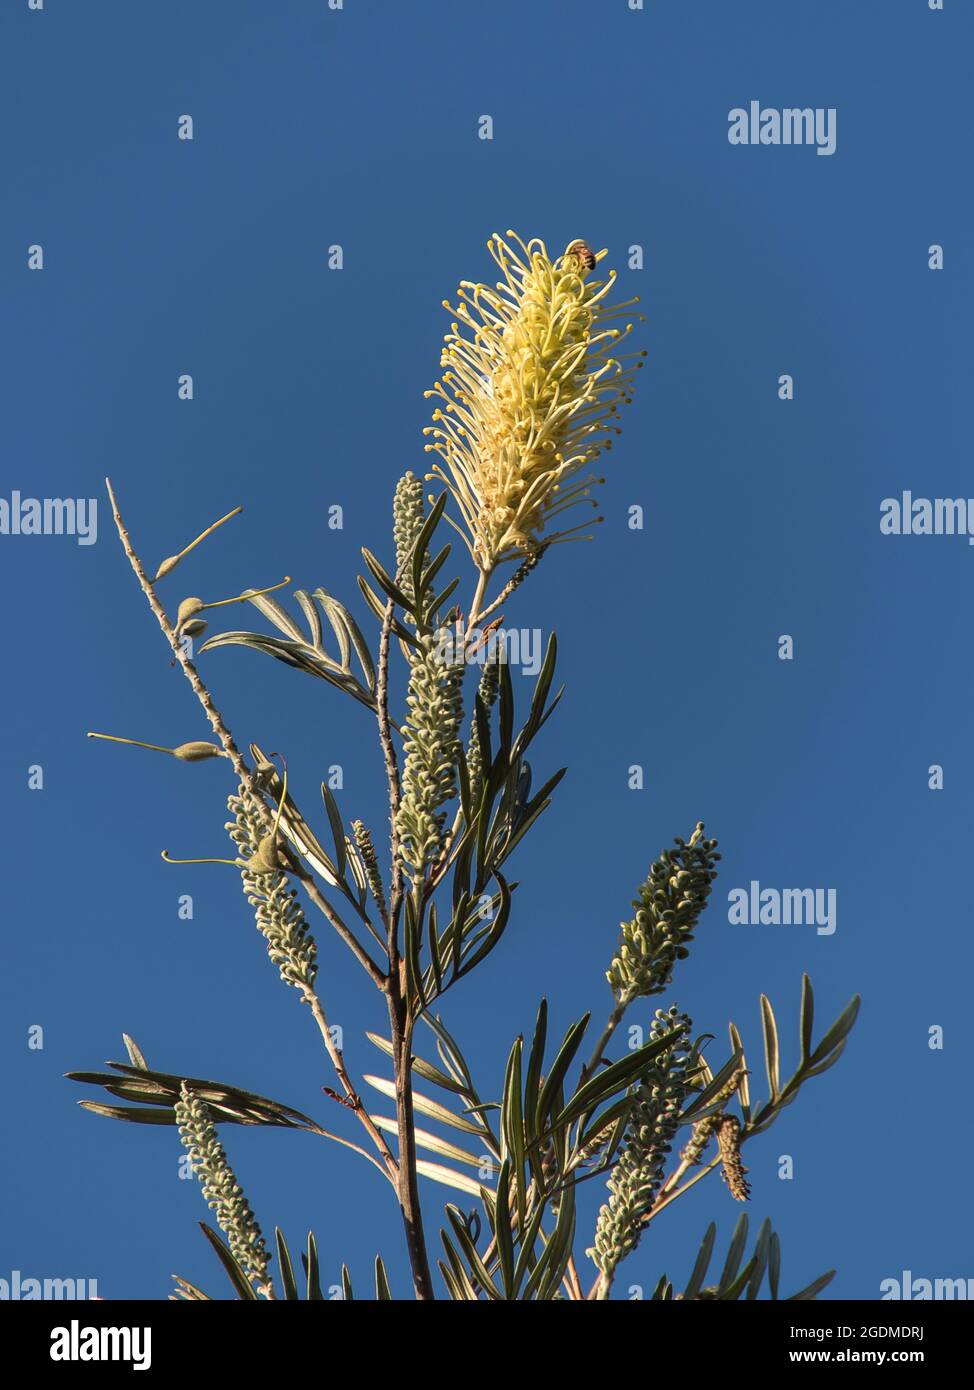 Creamy-white flower-head of Grevillea 'Moonlight' , with buds and foliage, in clear blue sky. Garden, winter, Queensland, Australia. Copy space. Stock Photo